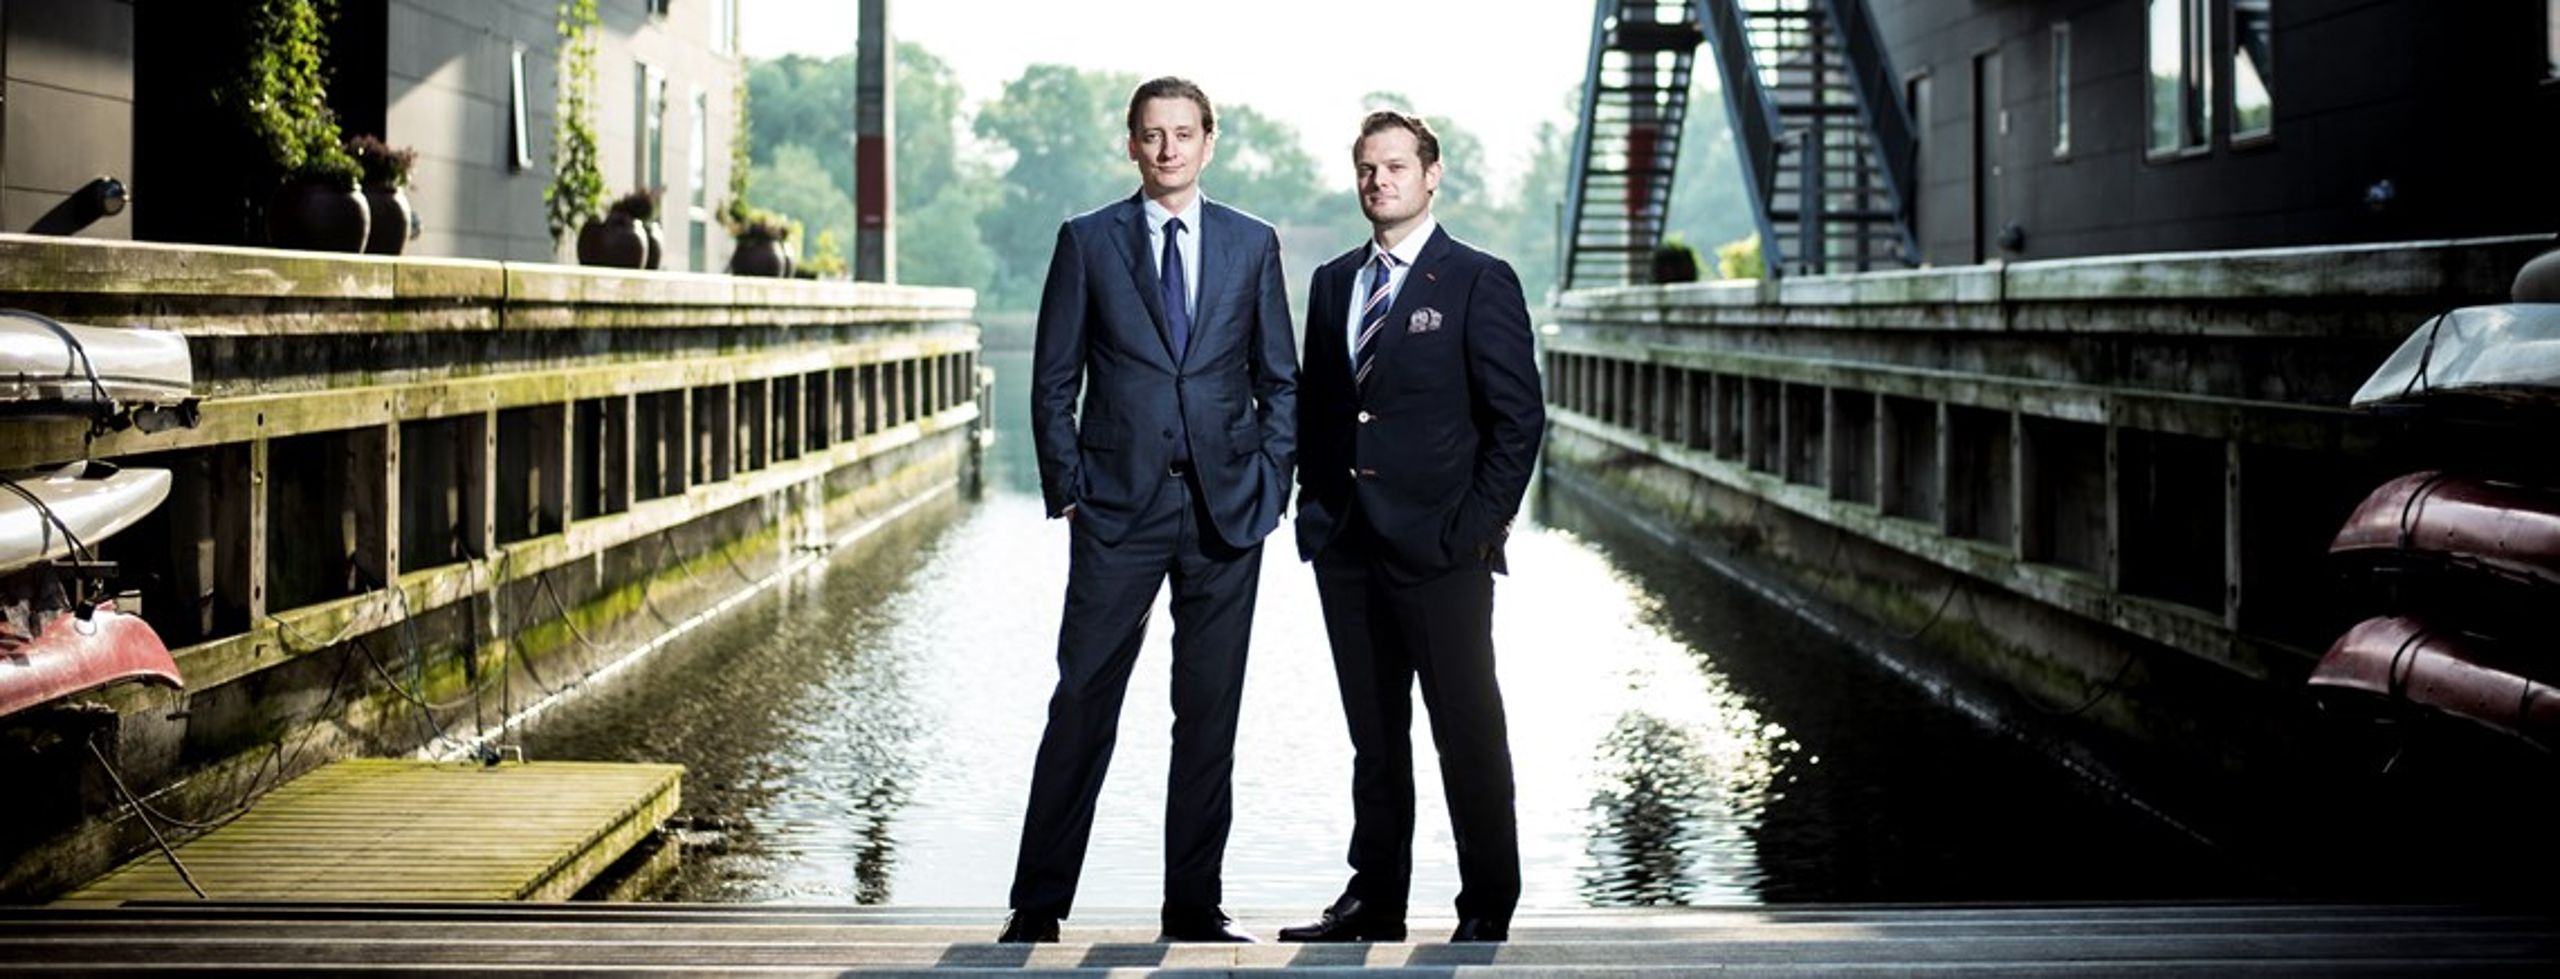 Morten Møller Holst (L) and Stefan Maard aims to find commercial means to fulfill the SDGs.&nbsp;